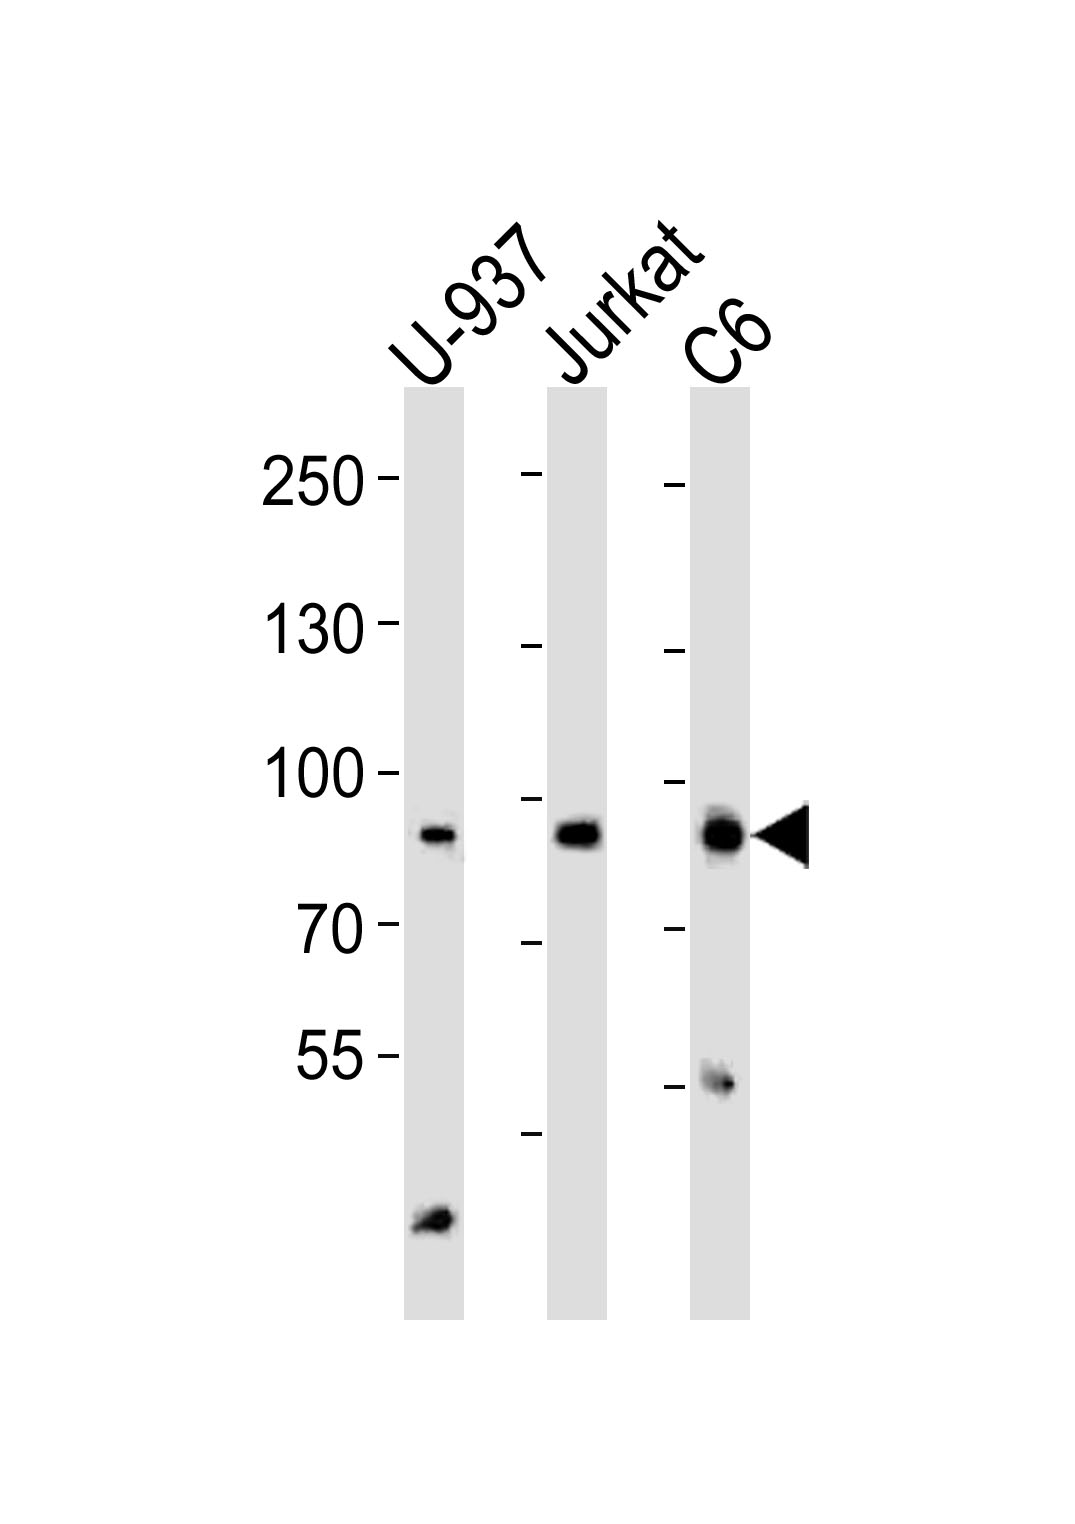 Western blot analysis of lysates from U-937, Jurkat, C6 cell line (from left to right), using PIK3R1/2 Antibody (Center)(Cat.  #AP20768c).  AP20768c was diluted at 1:1000 at each lane.  A goat anti-rabbit IgG H&L(HRP) at 1:5000 dilution was used as the secondary antibody. Lysates at 35ug per lane.